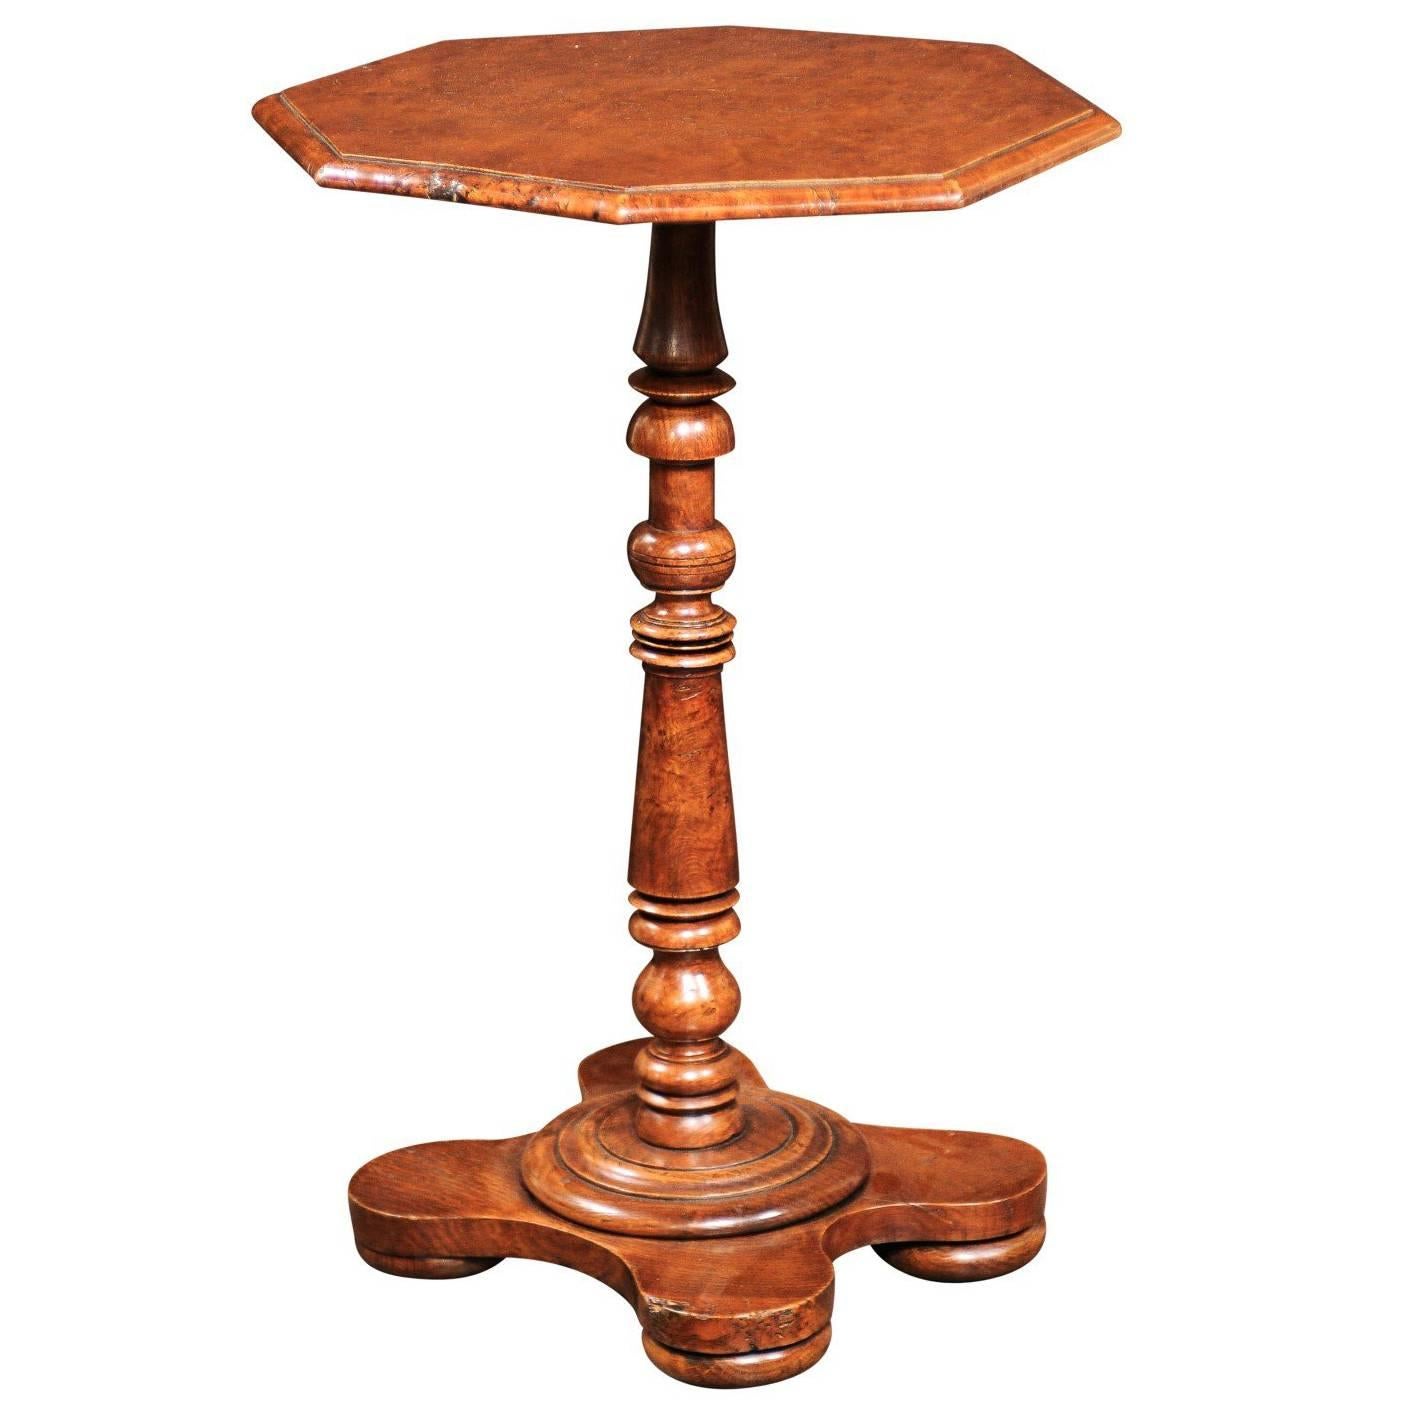 English Burl Elm Side Table with Octagonal Top over Quatrefoil Base, circa 1870